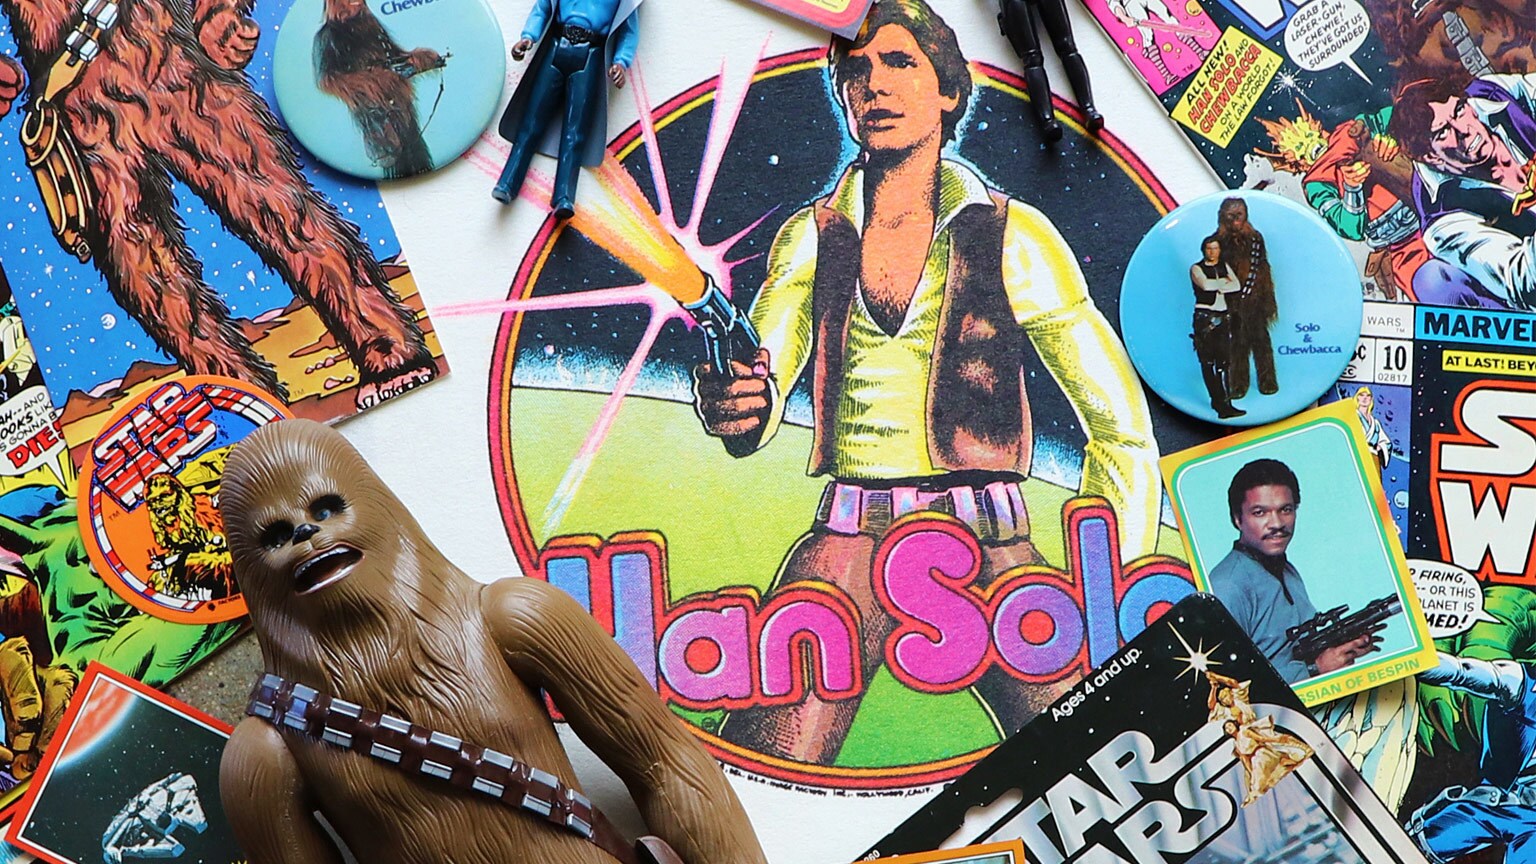 Celebrating Solo: 5 Cool Items from the Lucasfilm Vault